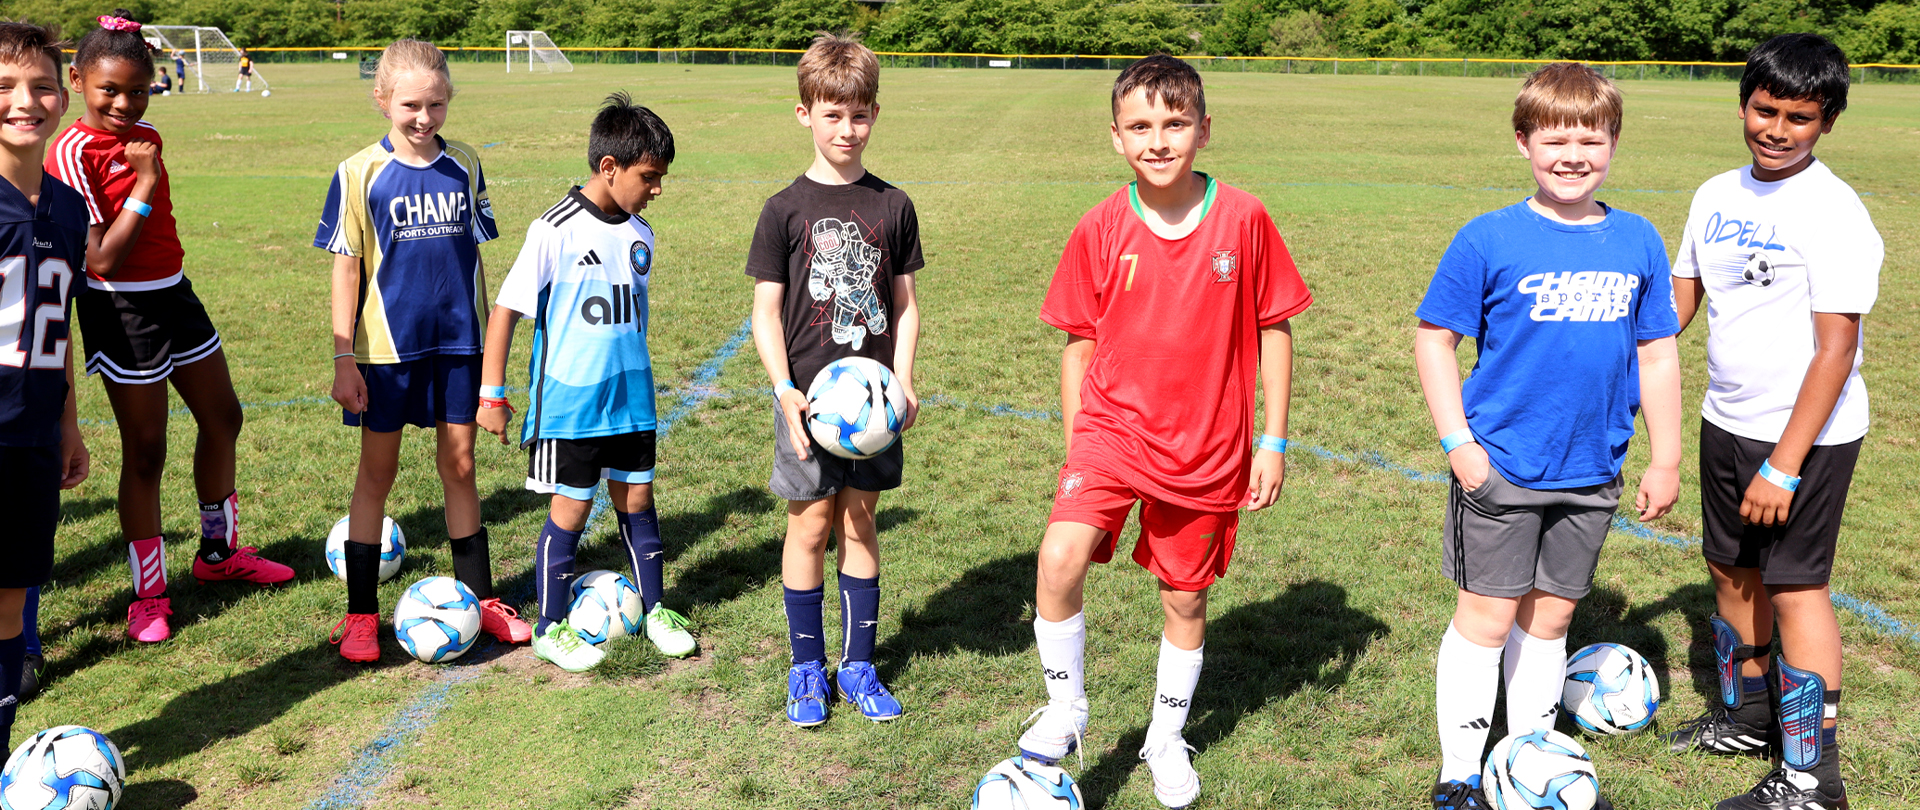 Check out our summer camps!
Youth Basketball & Soccer
 
